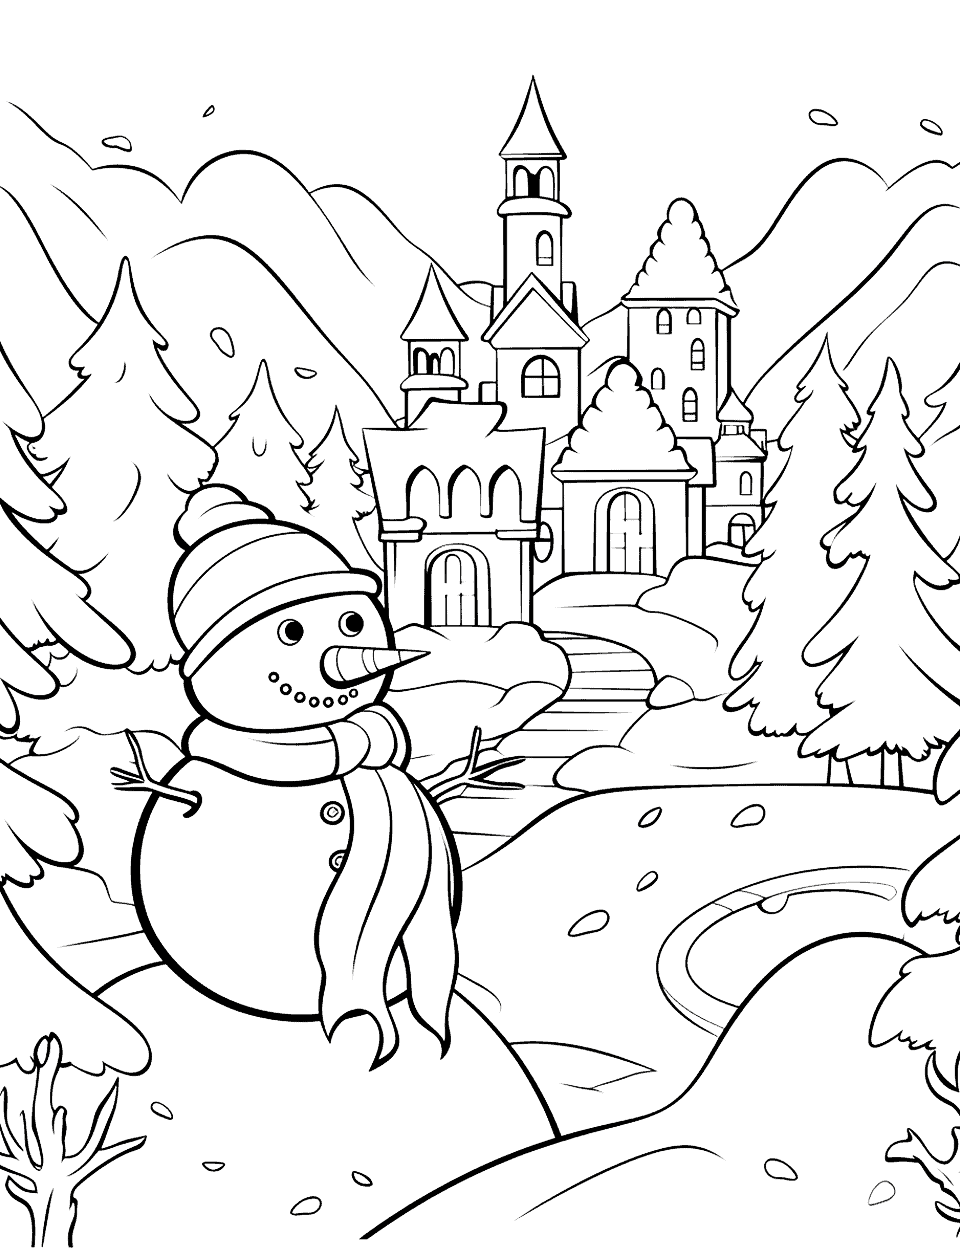 Frozen's Snowy Kingdom Winter Coloring Page - A scene from Frozen showing the snowy kingdom of Arendelle.